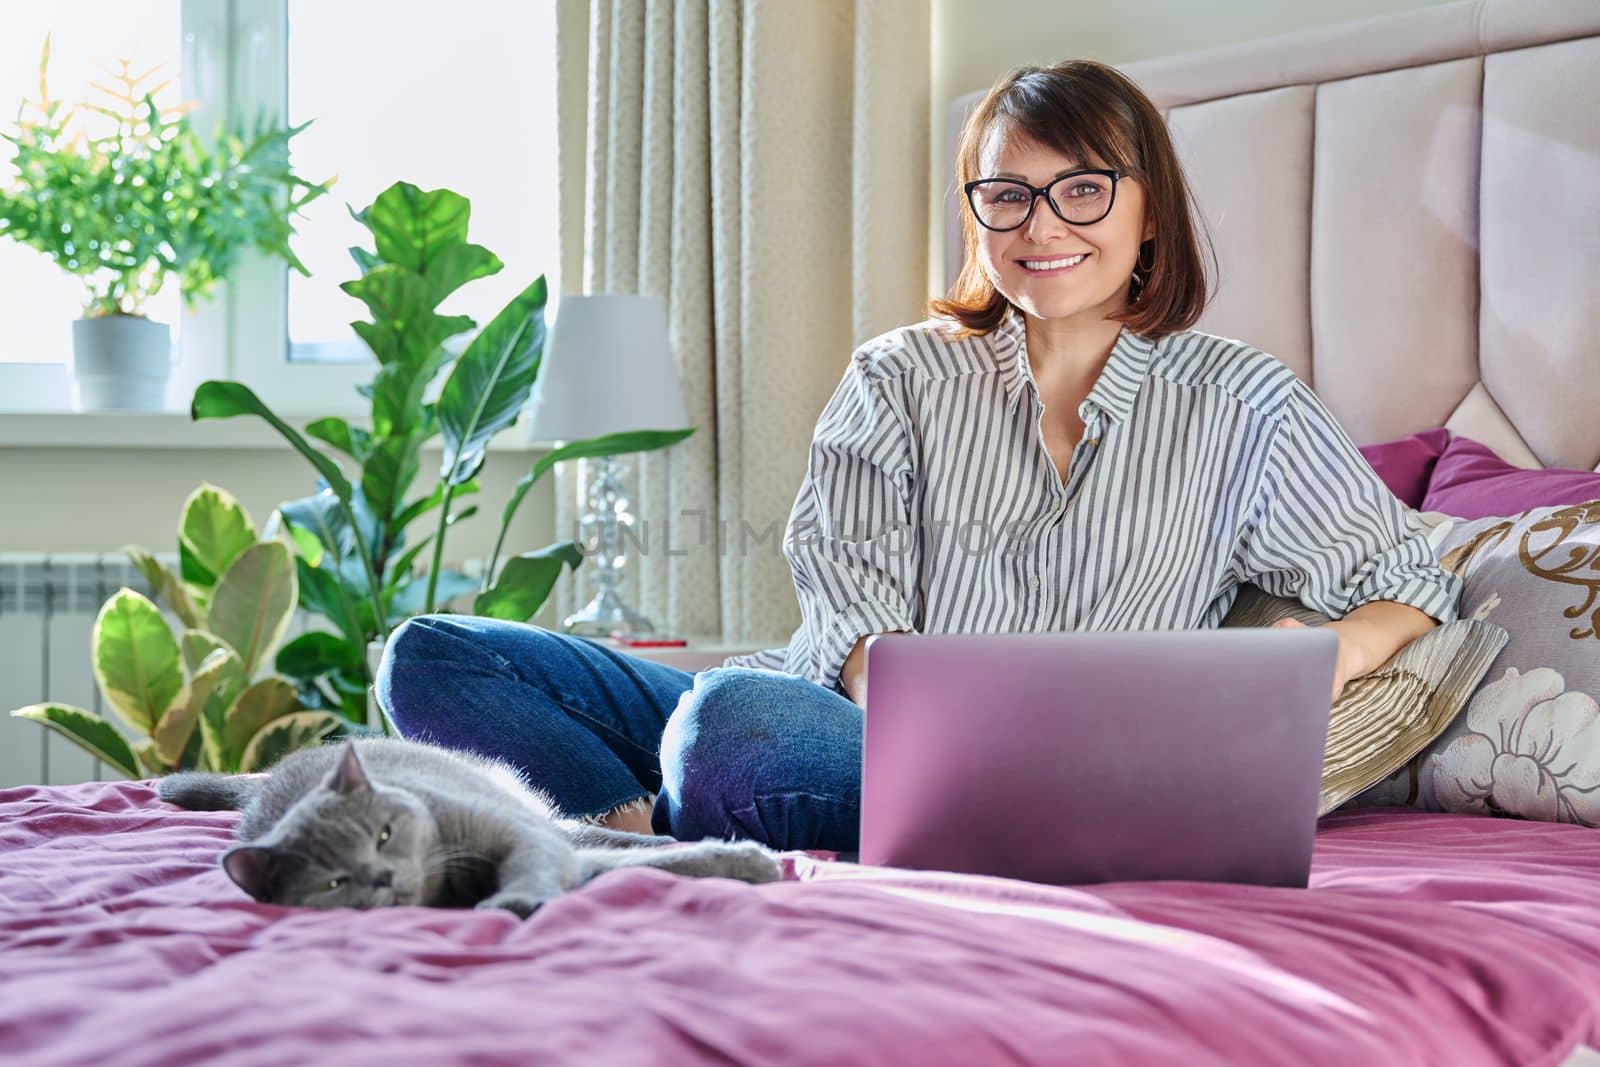 Middle aged woman at home on bed with laptop and cat. Mature 40s female looking at camera, on sofa with pet. Work at home, technology, leisure, freelancing, lifestyle, people and animals concept